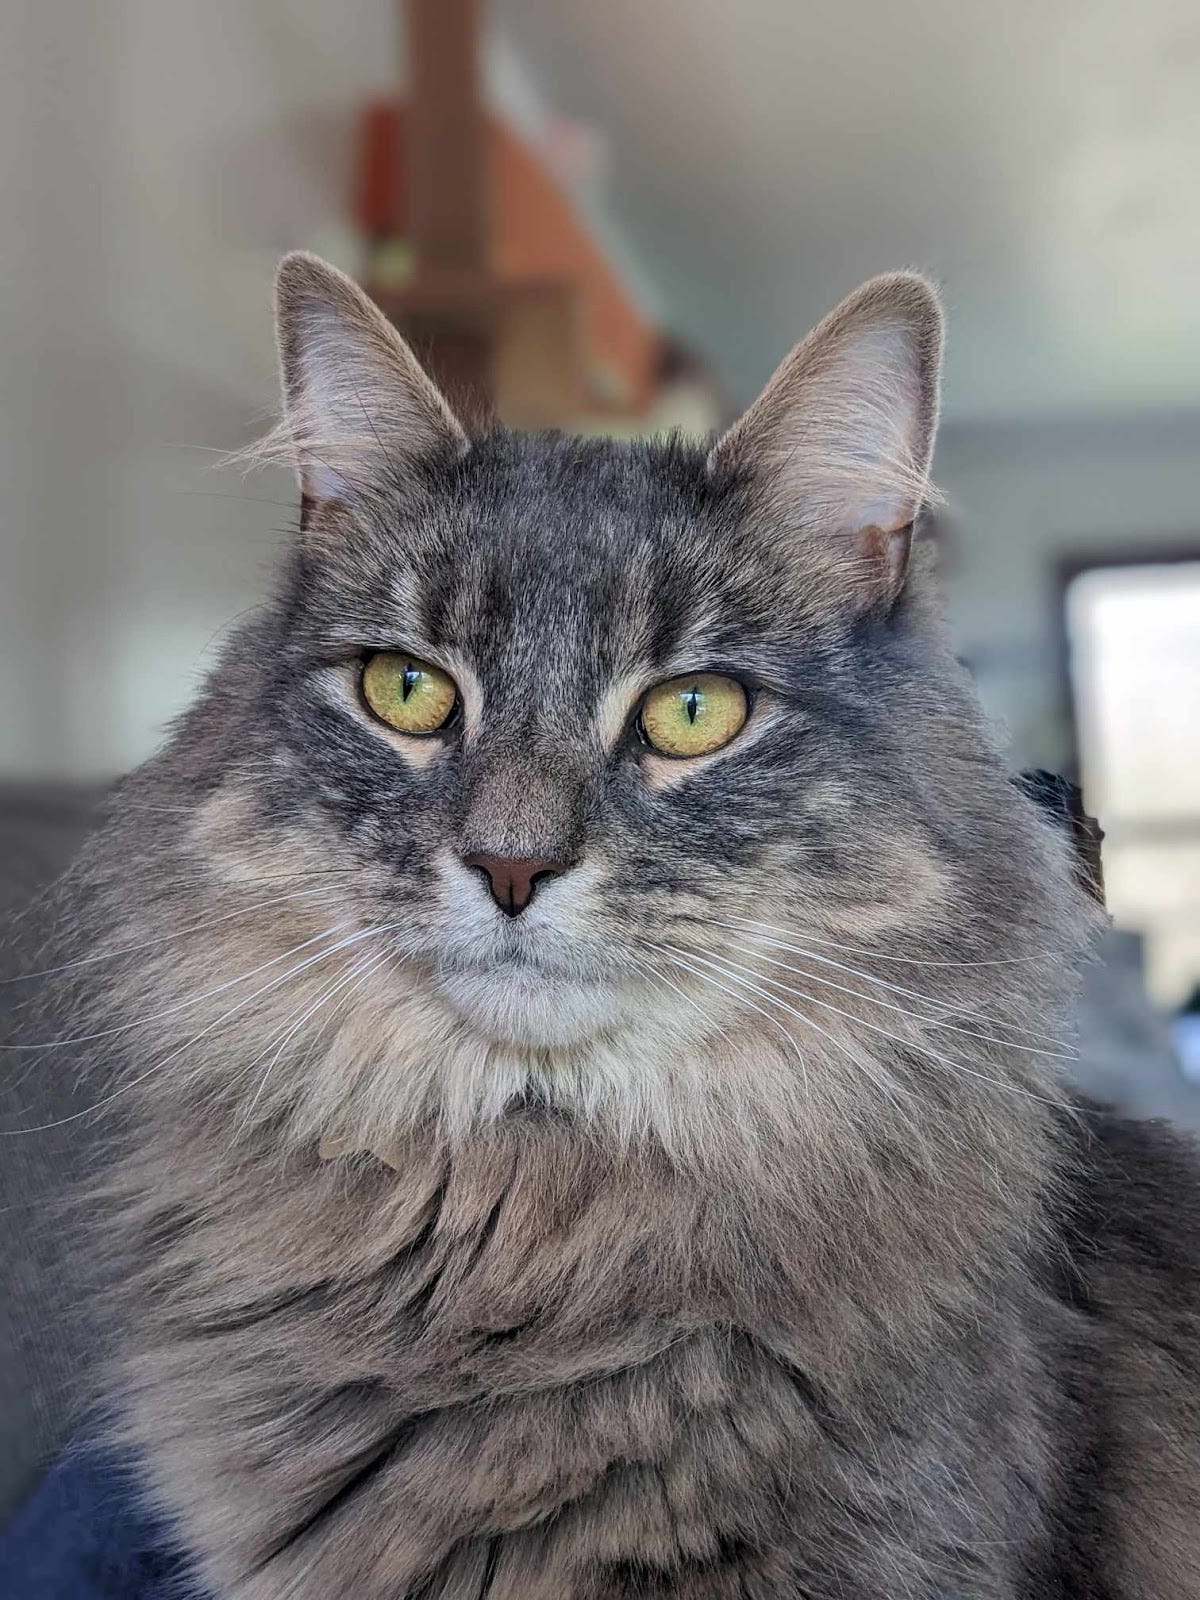 a fluffy gray and brown cat with yellow eyes looks regally into the camera